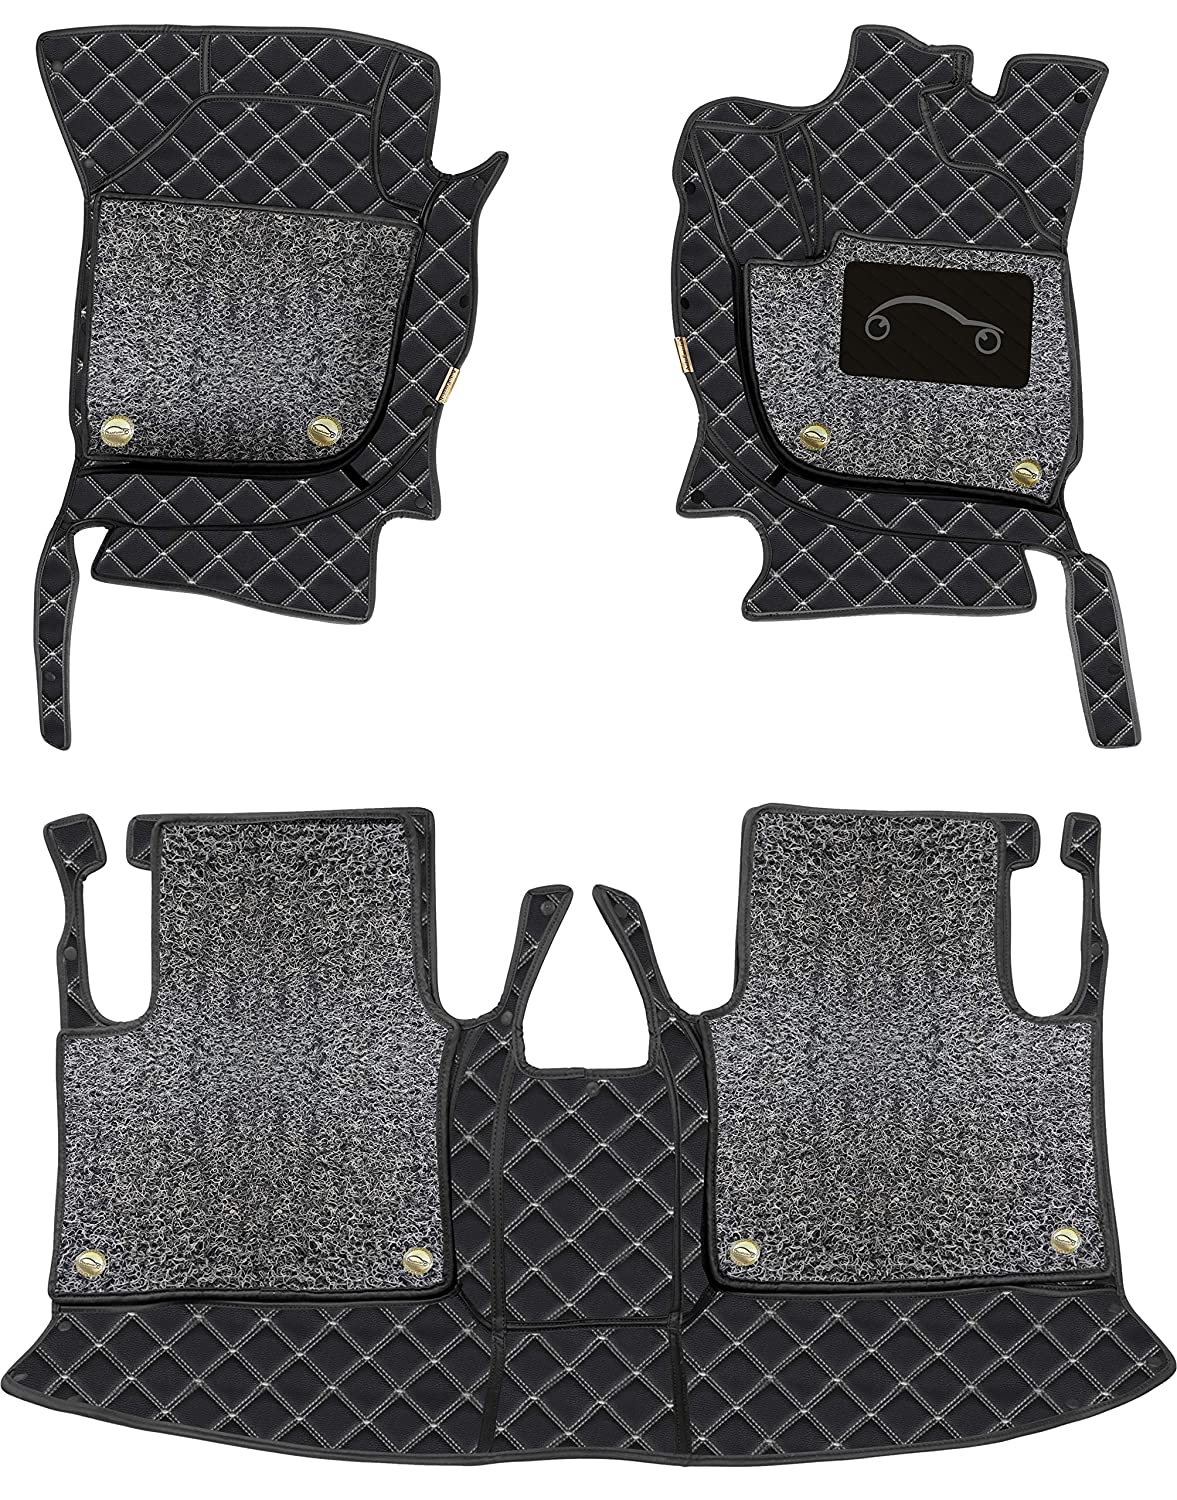 Mercedes GLC Coupe 300d 4MATIC 2020 7D Luxury Car Mat, All Weather Proof, Anti-Skid, 100% Waterproof & Odorless with Unique Diamond Fish Design (24mm Luxury PU Leather, 2 Rows)